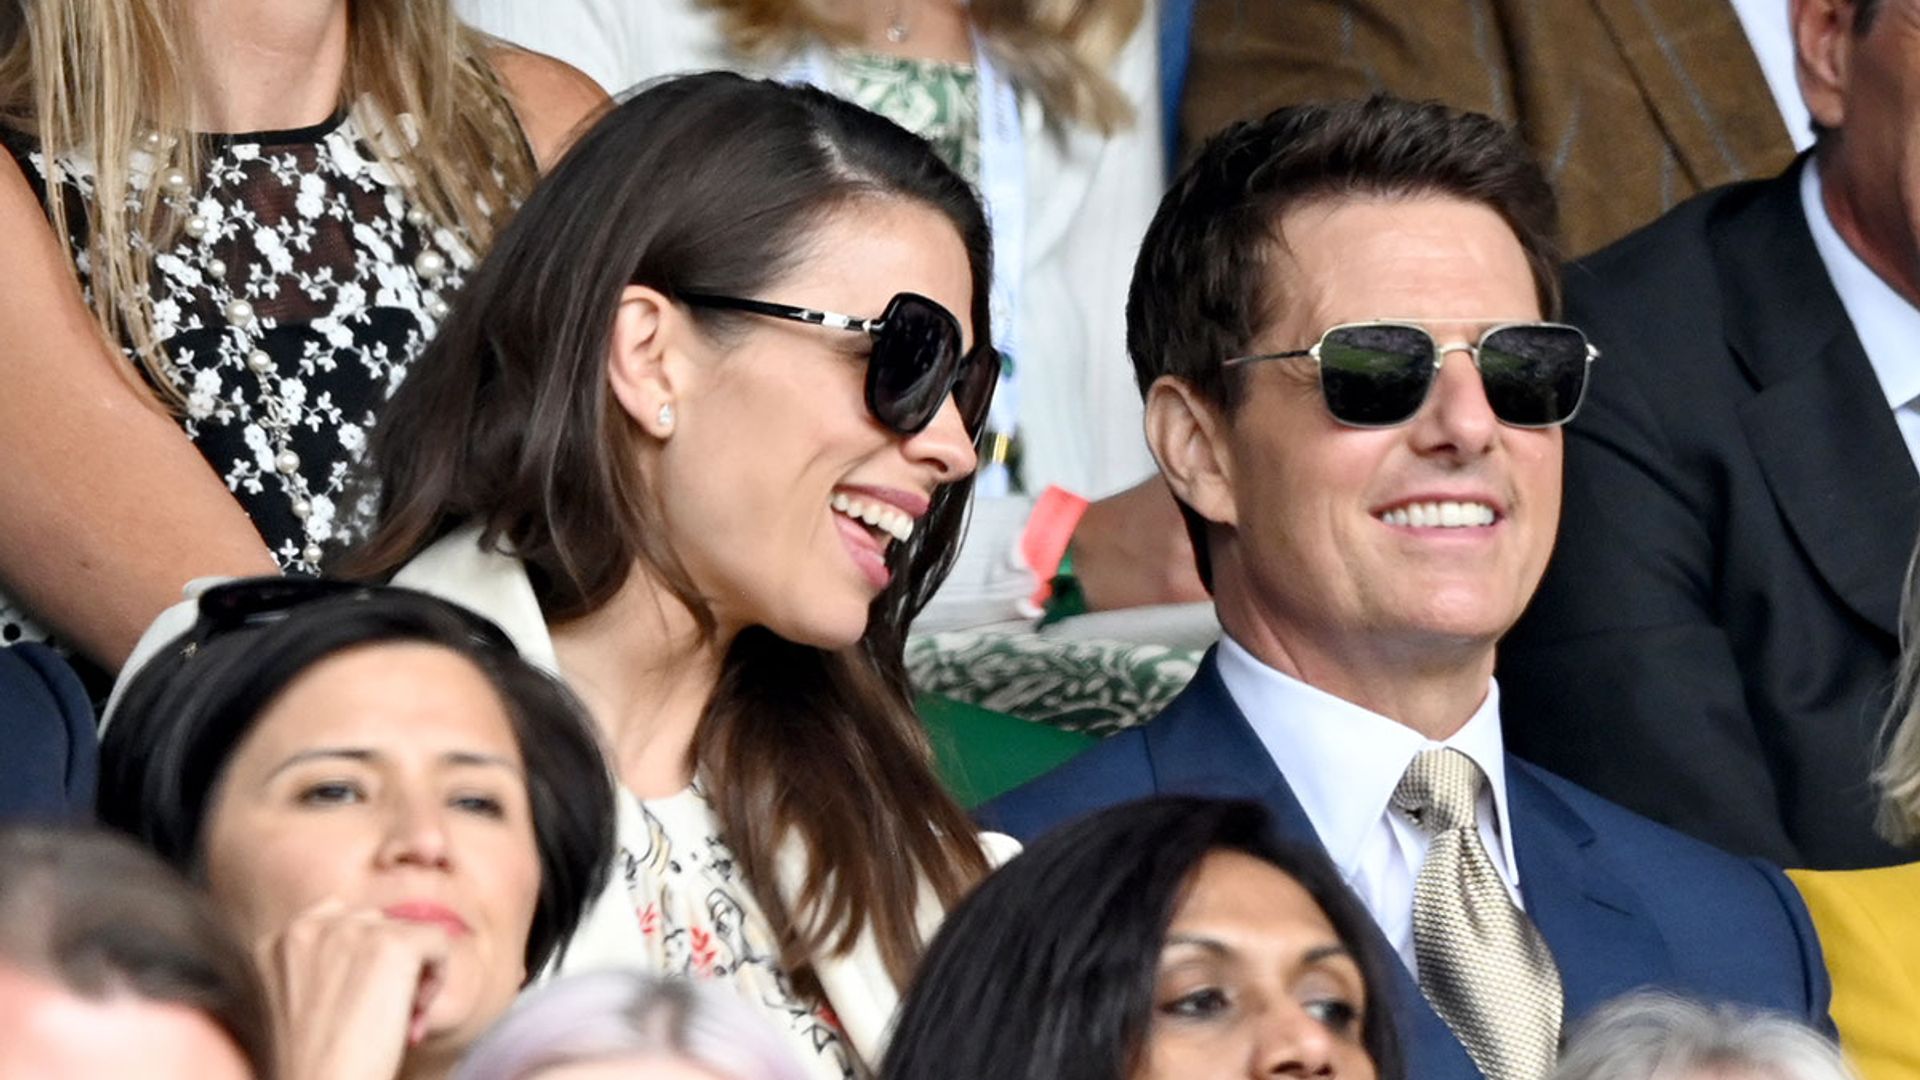 Tom Cruise sparks romance rumours as he attends Wimbledon final with co-star Hayley Atwell